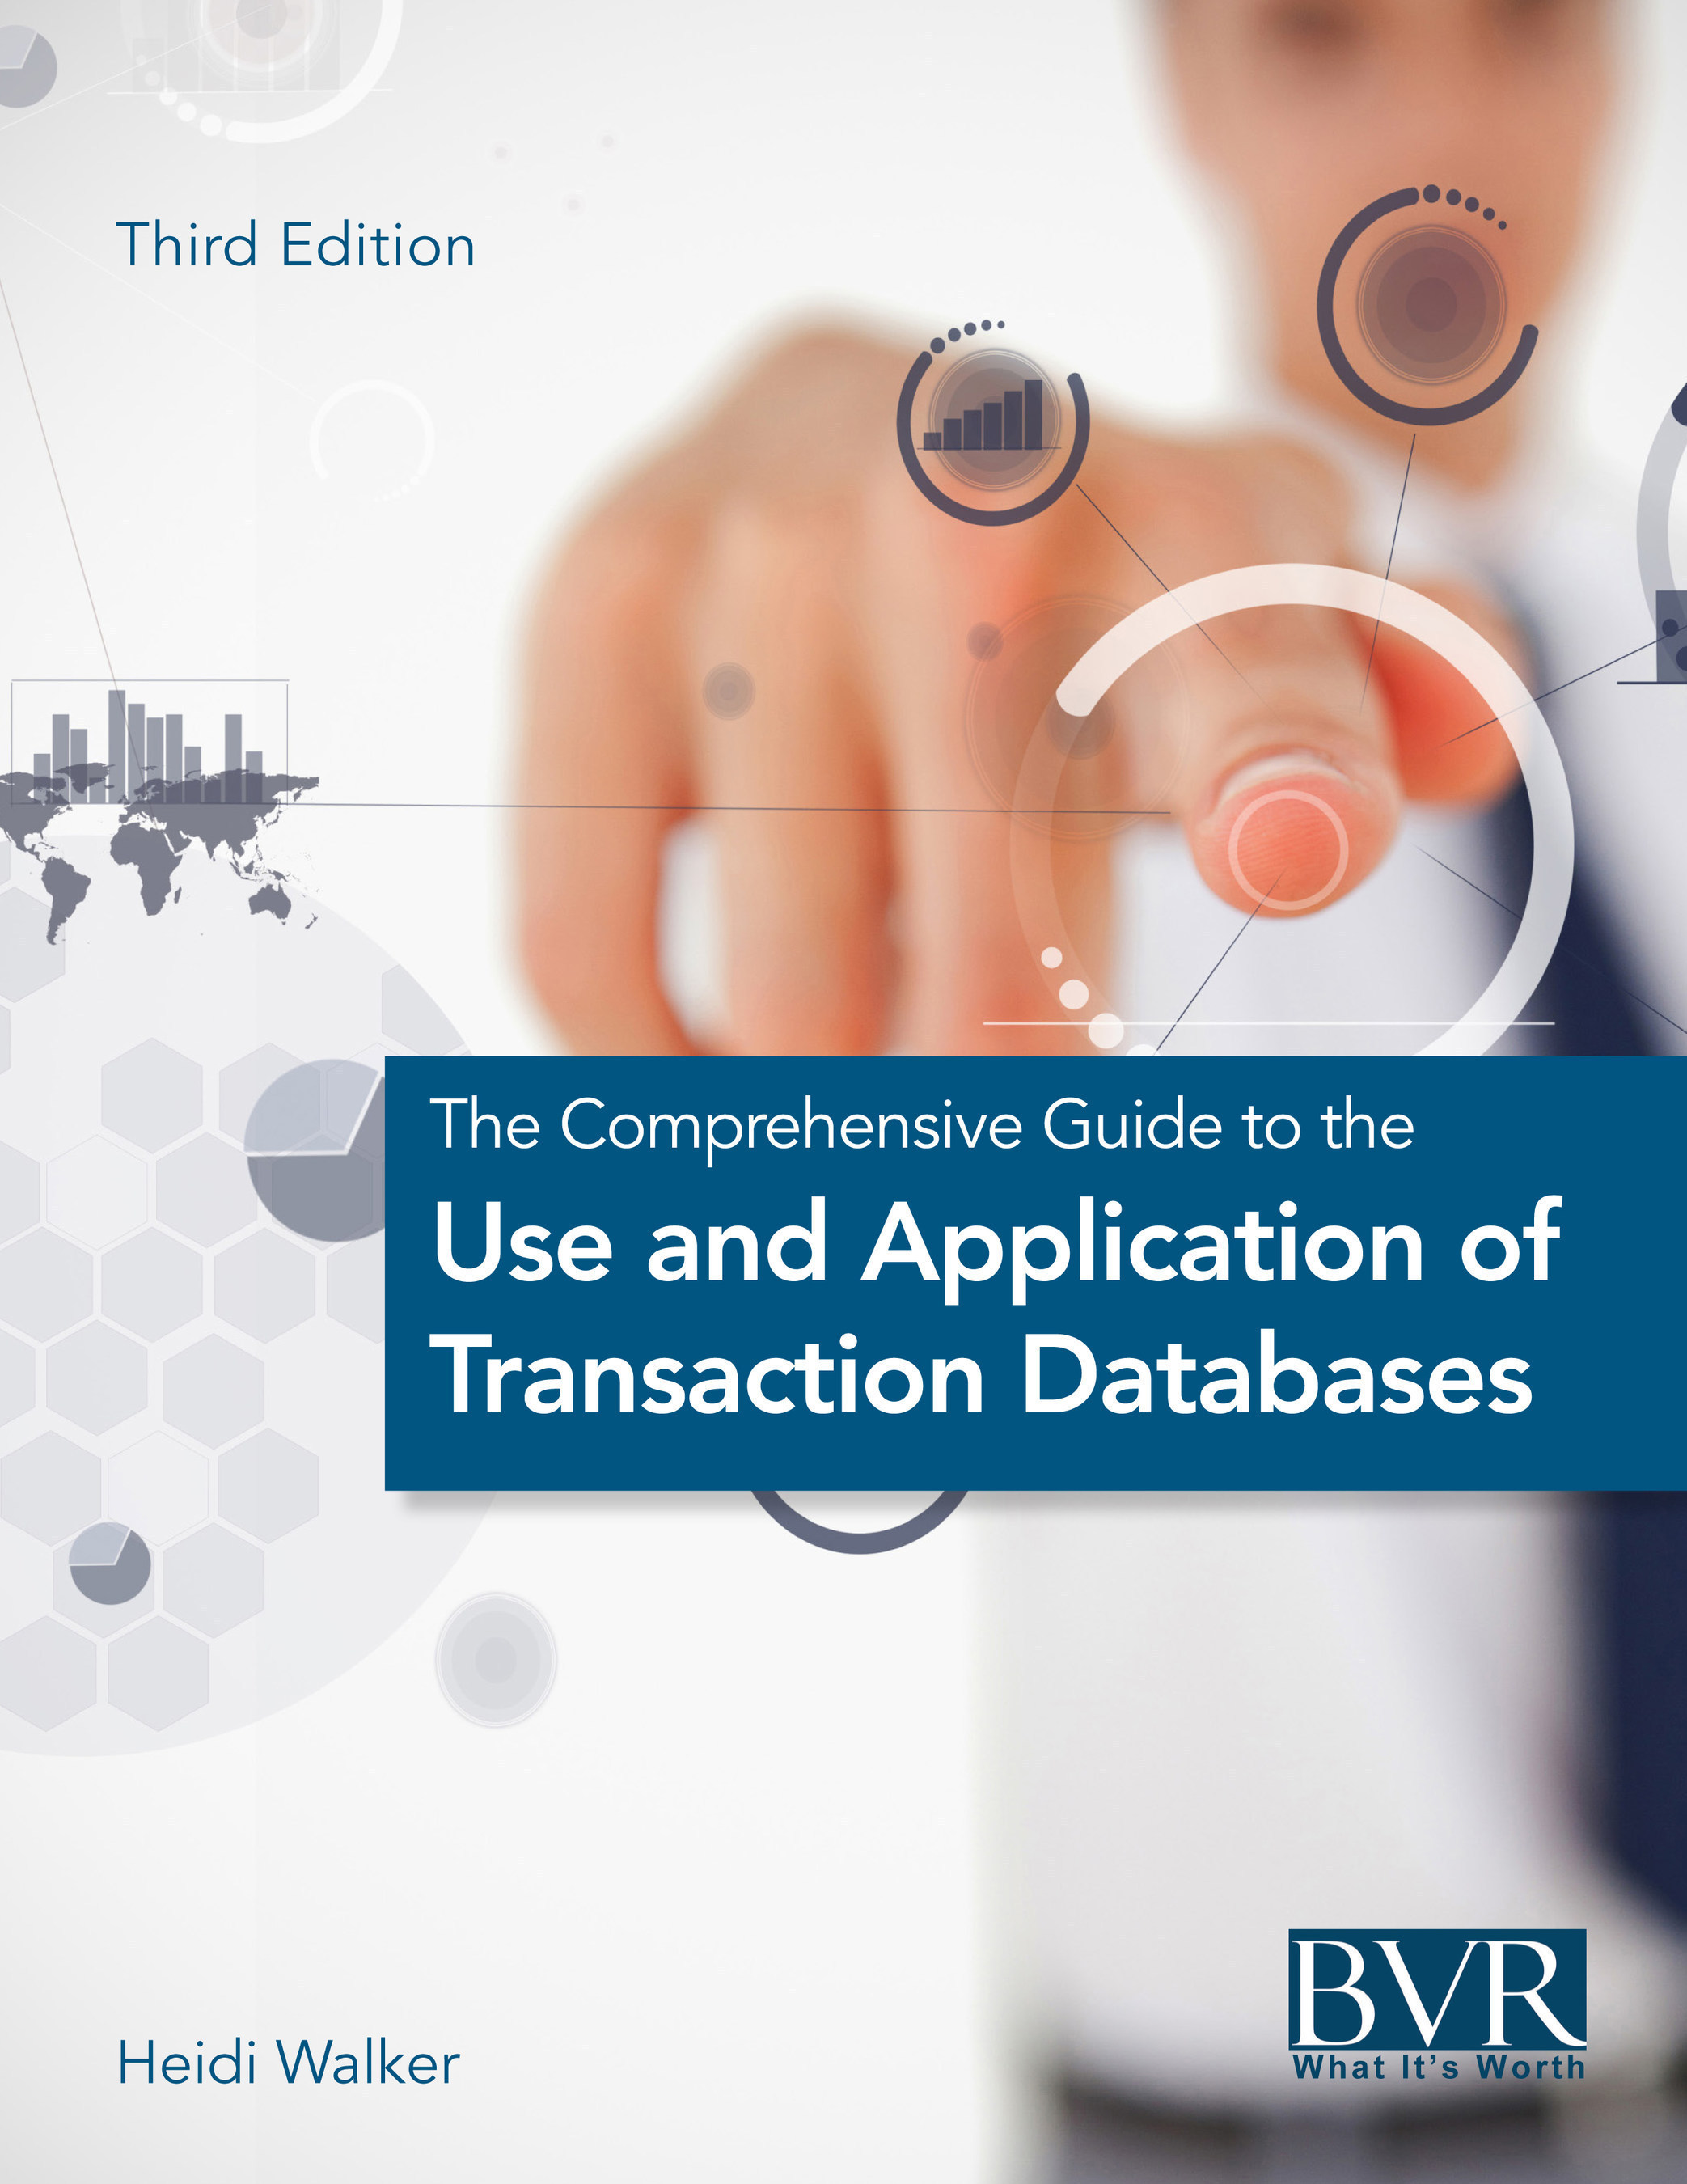 Comprehensive Guide to the Use and Application of Transaction Databases